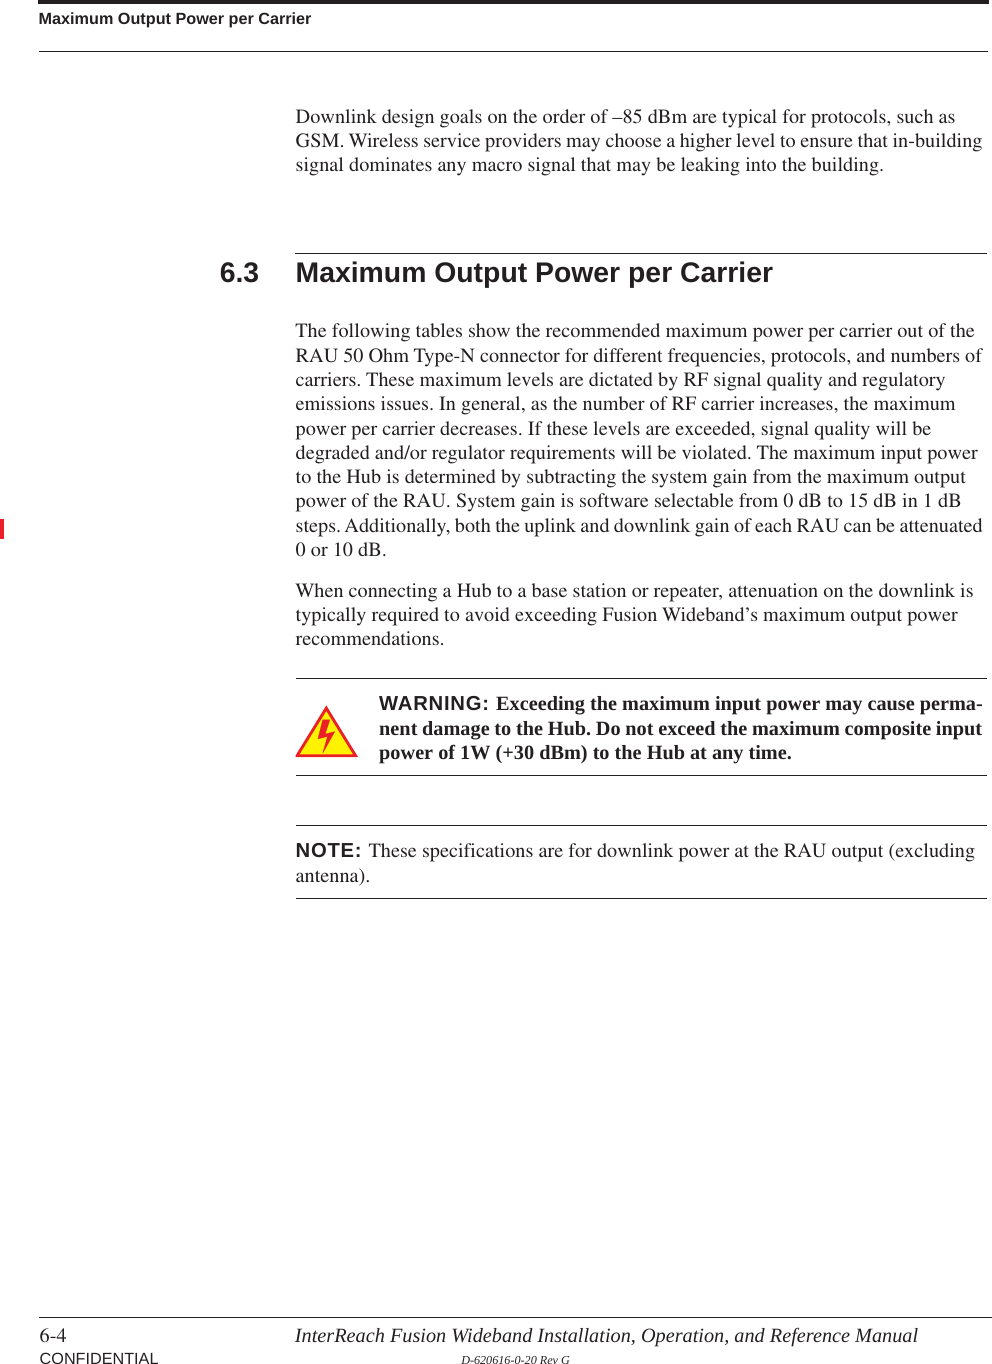 Maximum Output Power per Carrier6-4 InterReach Fusion Wideband Installation, Operation, and Reference Manual CONFIDENTIAL D-620616-0-20 Rev GDownlink design goals on the order of –85 dBm are typical for protocols, such as GSM. Wireless service providers may choose a higher level to ensure that in-building signal dominates any macro signal that may be leaking into the building.6.3 Maximum Output Power per CarrierThe following tables show the recommended maximum power per carrier out of the RAU 50 Ohm Type-N connector for different frequencies, protocols, and numbers of carriers. These maximum levels are dictated by RF signal quality and regulatory emissions issues. In general, as the number of RF carrier increases, the maximum power per carrier decreases. If these levels are exceeded, signal quality will be degraded and/or regulator requirements will be violated. The maximum input power to the Hub is determined by subtracting the system gain from the maximum output power of the RAU. System gain is software selectable from 0 dB to 15 dB in 1 dB steps. Additionally, both the uplink and downlink gain of each RAU can be attenuated 0 or 10 dB.When connecting a Hub to a base station or repeater, attenuation on the downlink is typically required to avoid exceeding Fusion Wideband’s maximum output power recommendations.WARNING: Exceeding the maximum input power may cause perma-nent damage to the Hub. Do not exceed the maximum composite input power of 1W (+30 dBm) to the Hub at any time.NOTE: These specifications are for downlink power at the RAU output (excluding antenna).